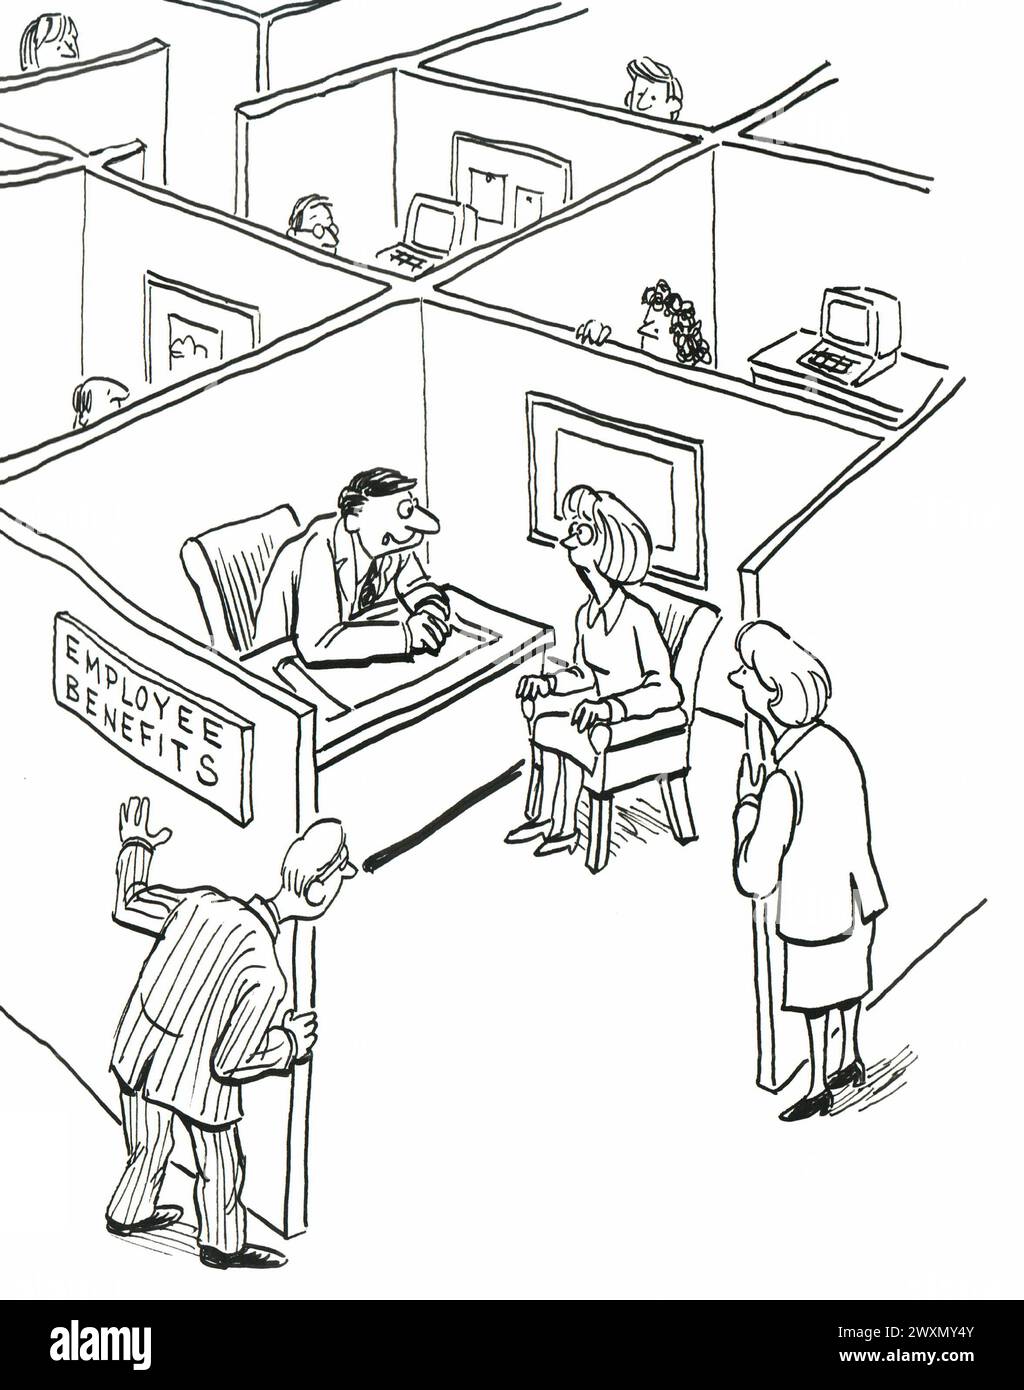 BW cartoon of employees listening in to the communication of employee benefits to new hire. Stock Photo